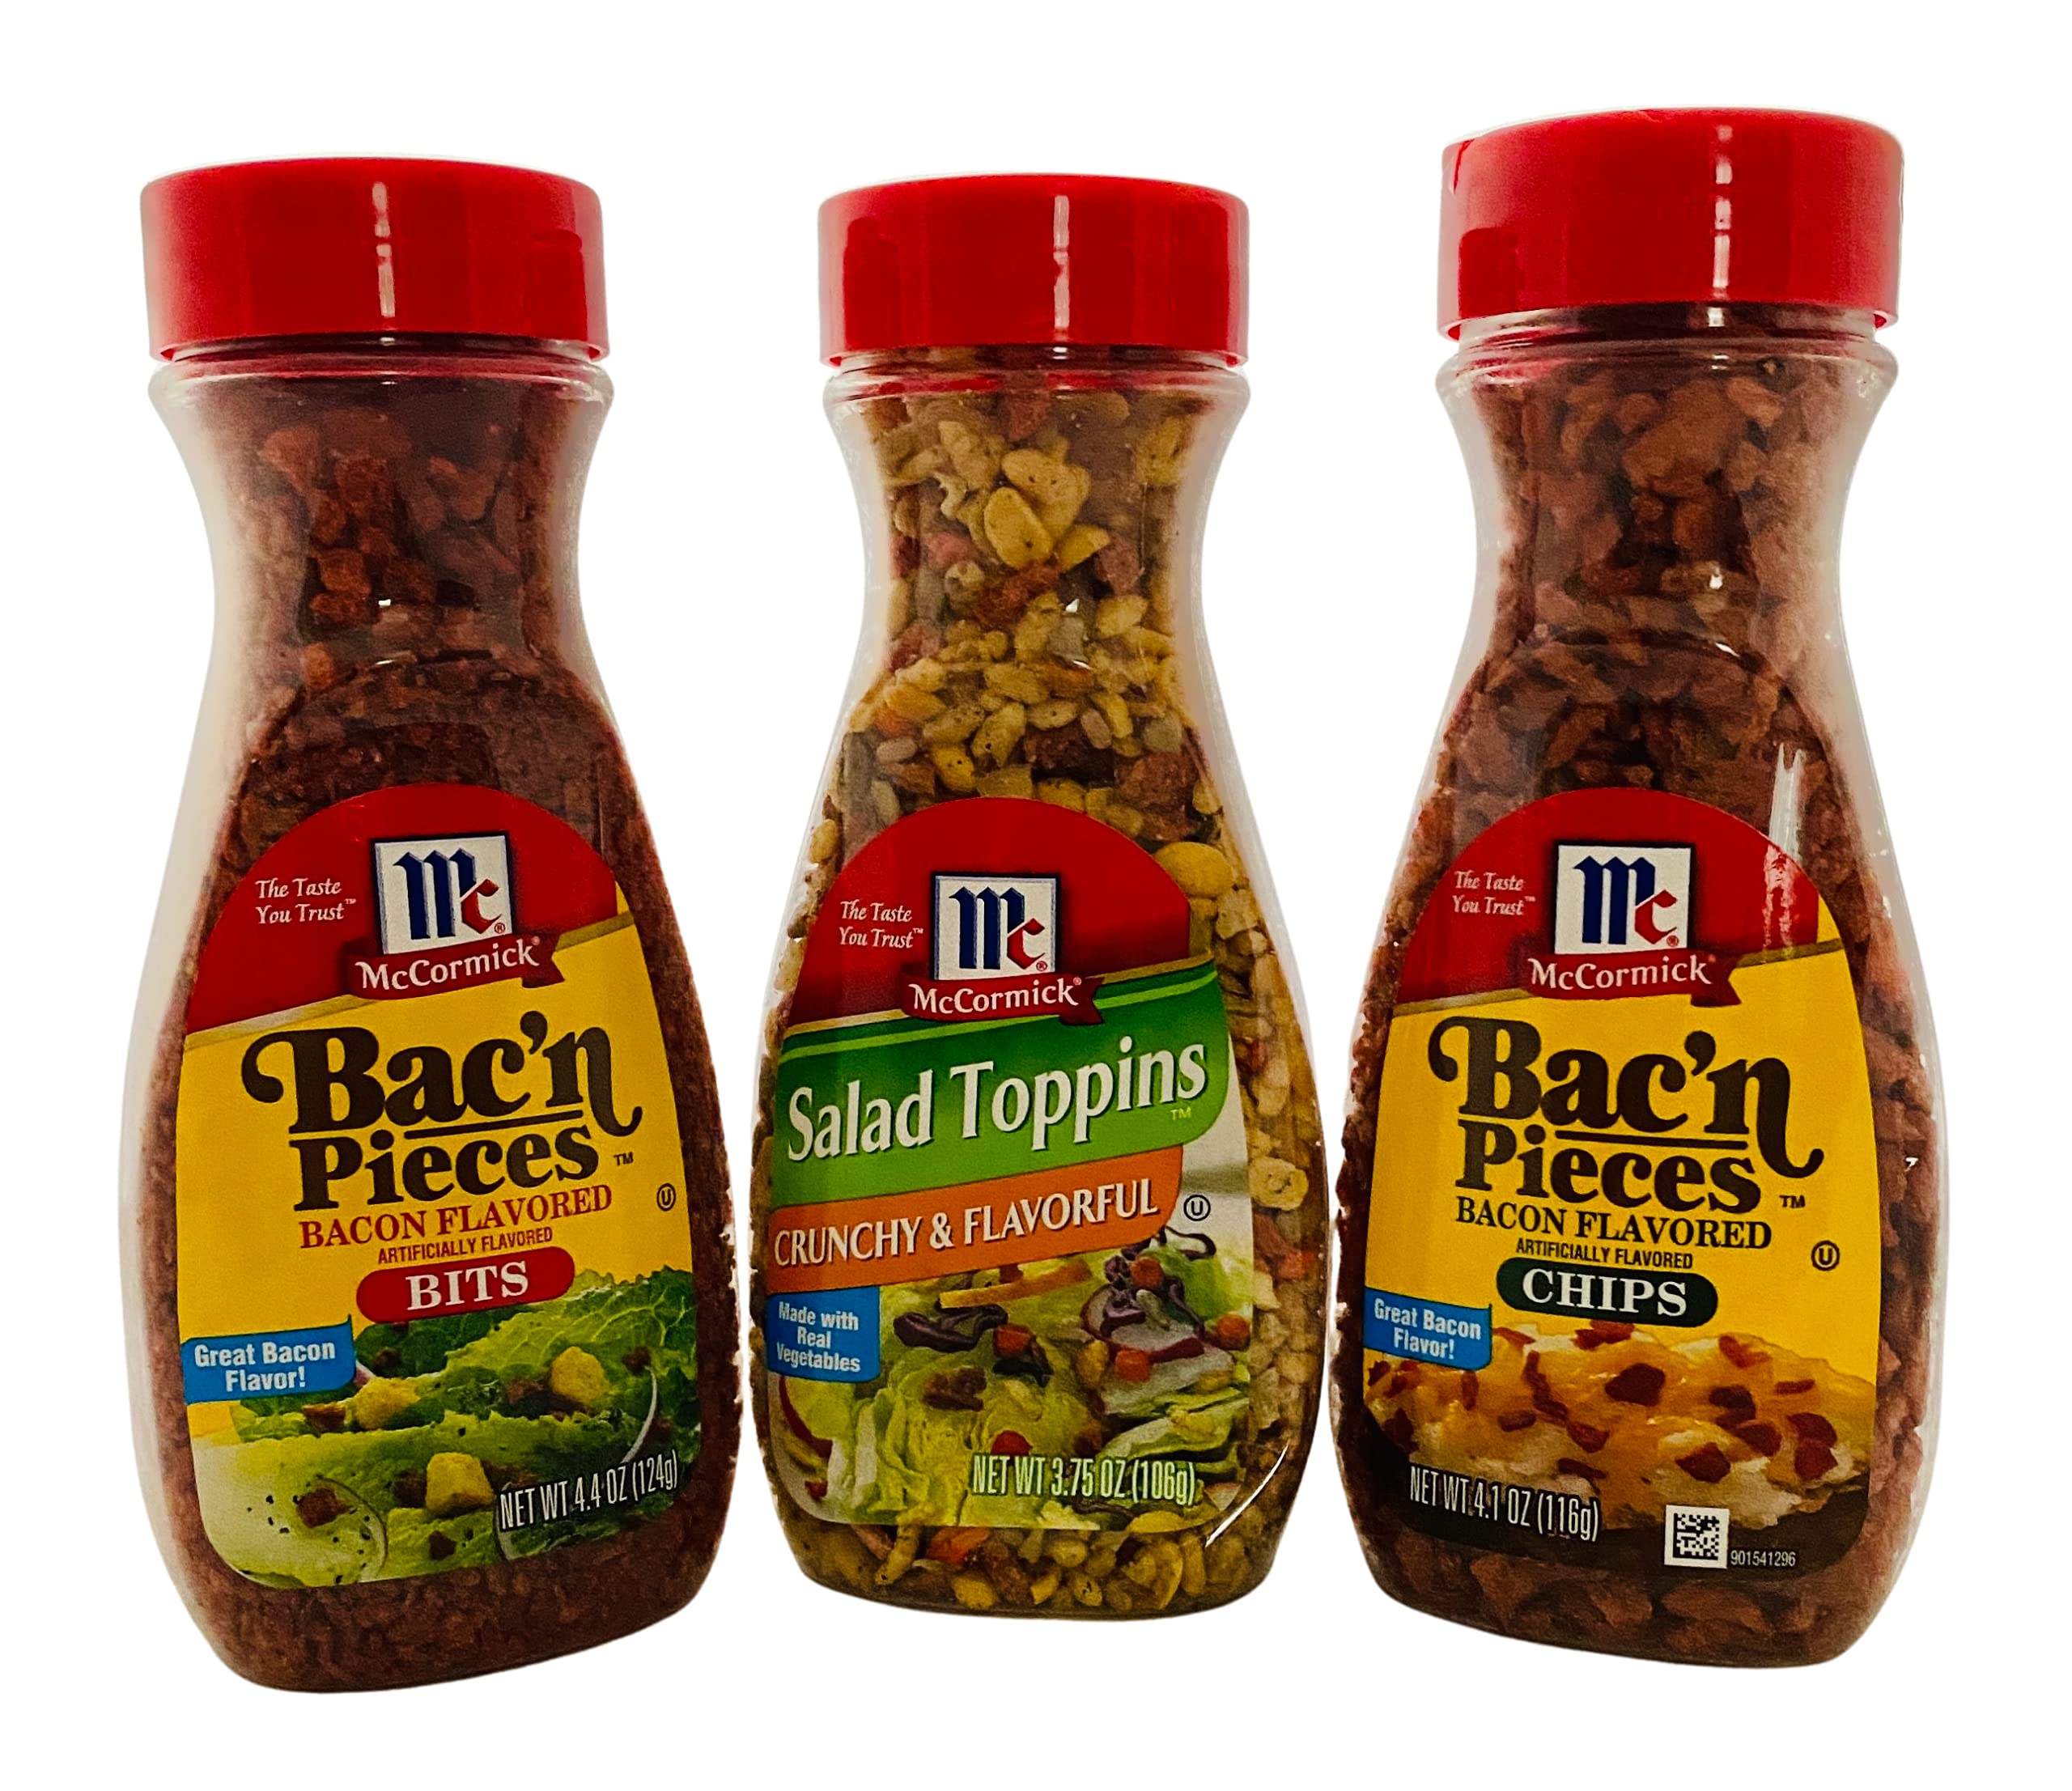 McCormick Salad Toppins, Crunchy & Flavorful, 3.75 oz (5 Pack)